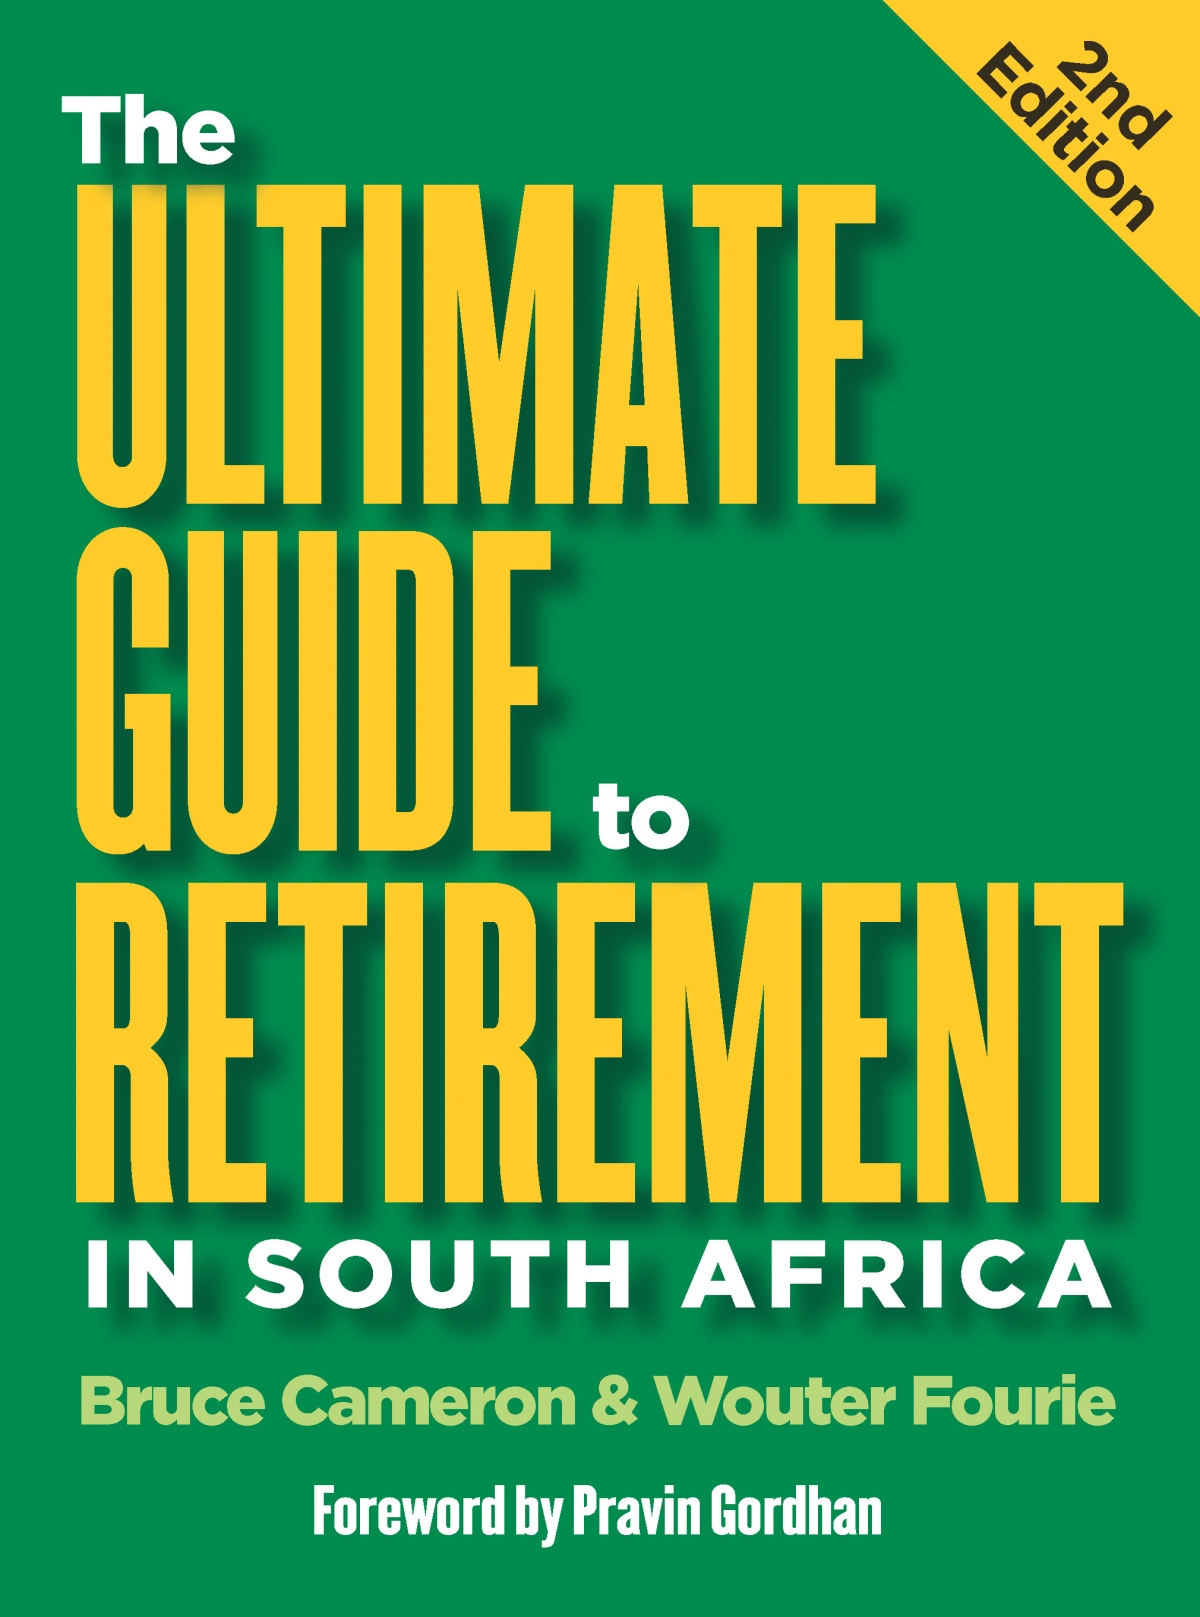 The Ultimate Guide to Retirement